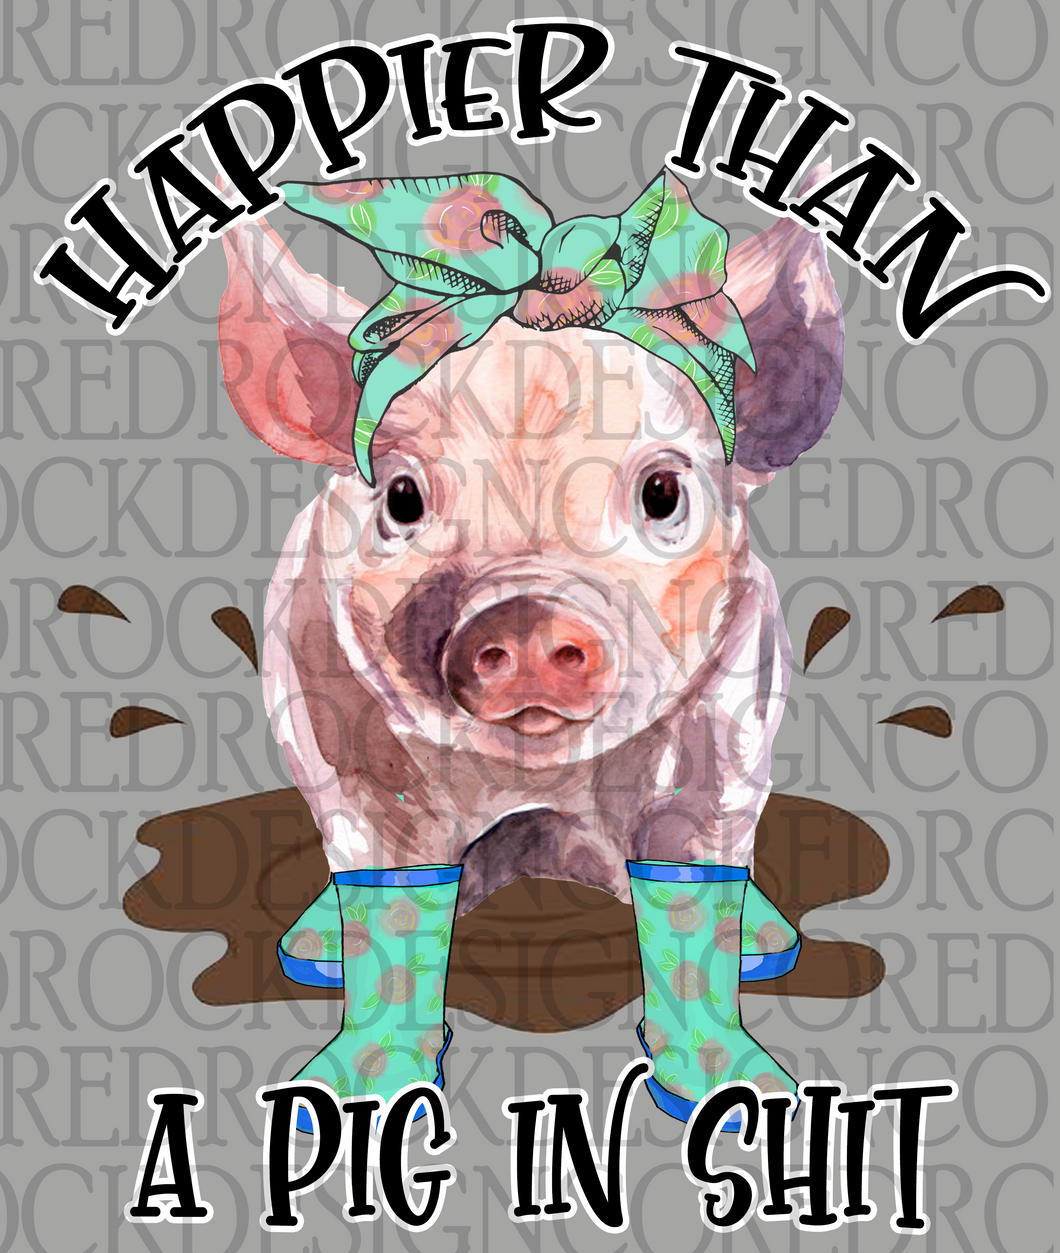 Happier than a Pig in Shit - DD